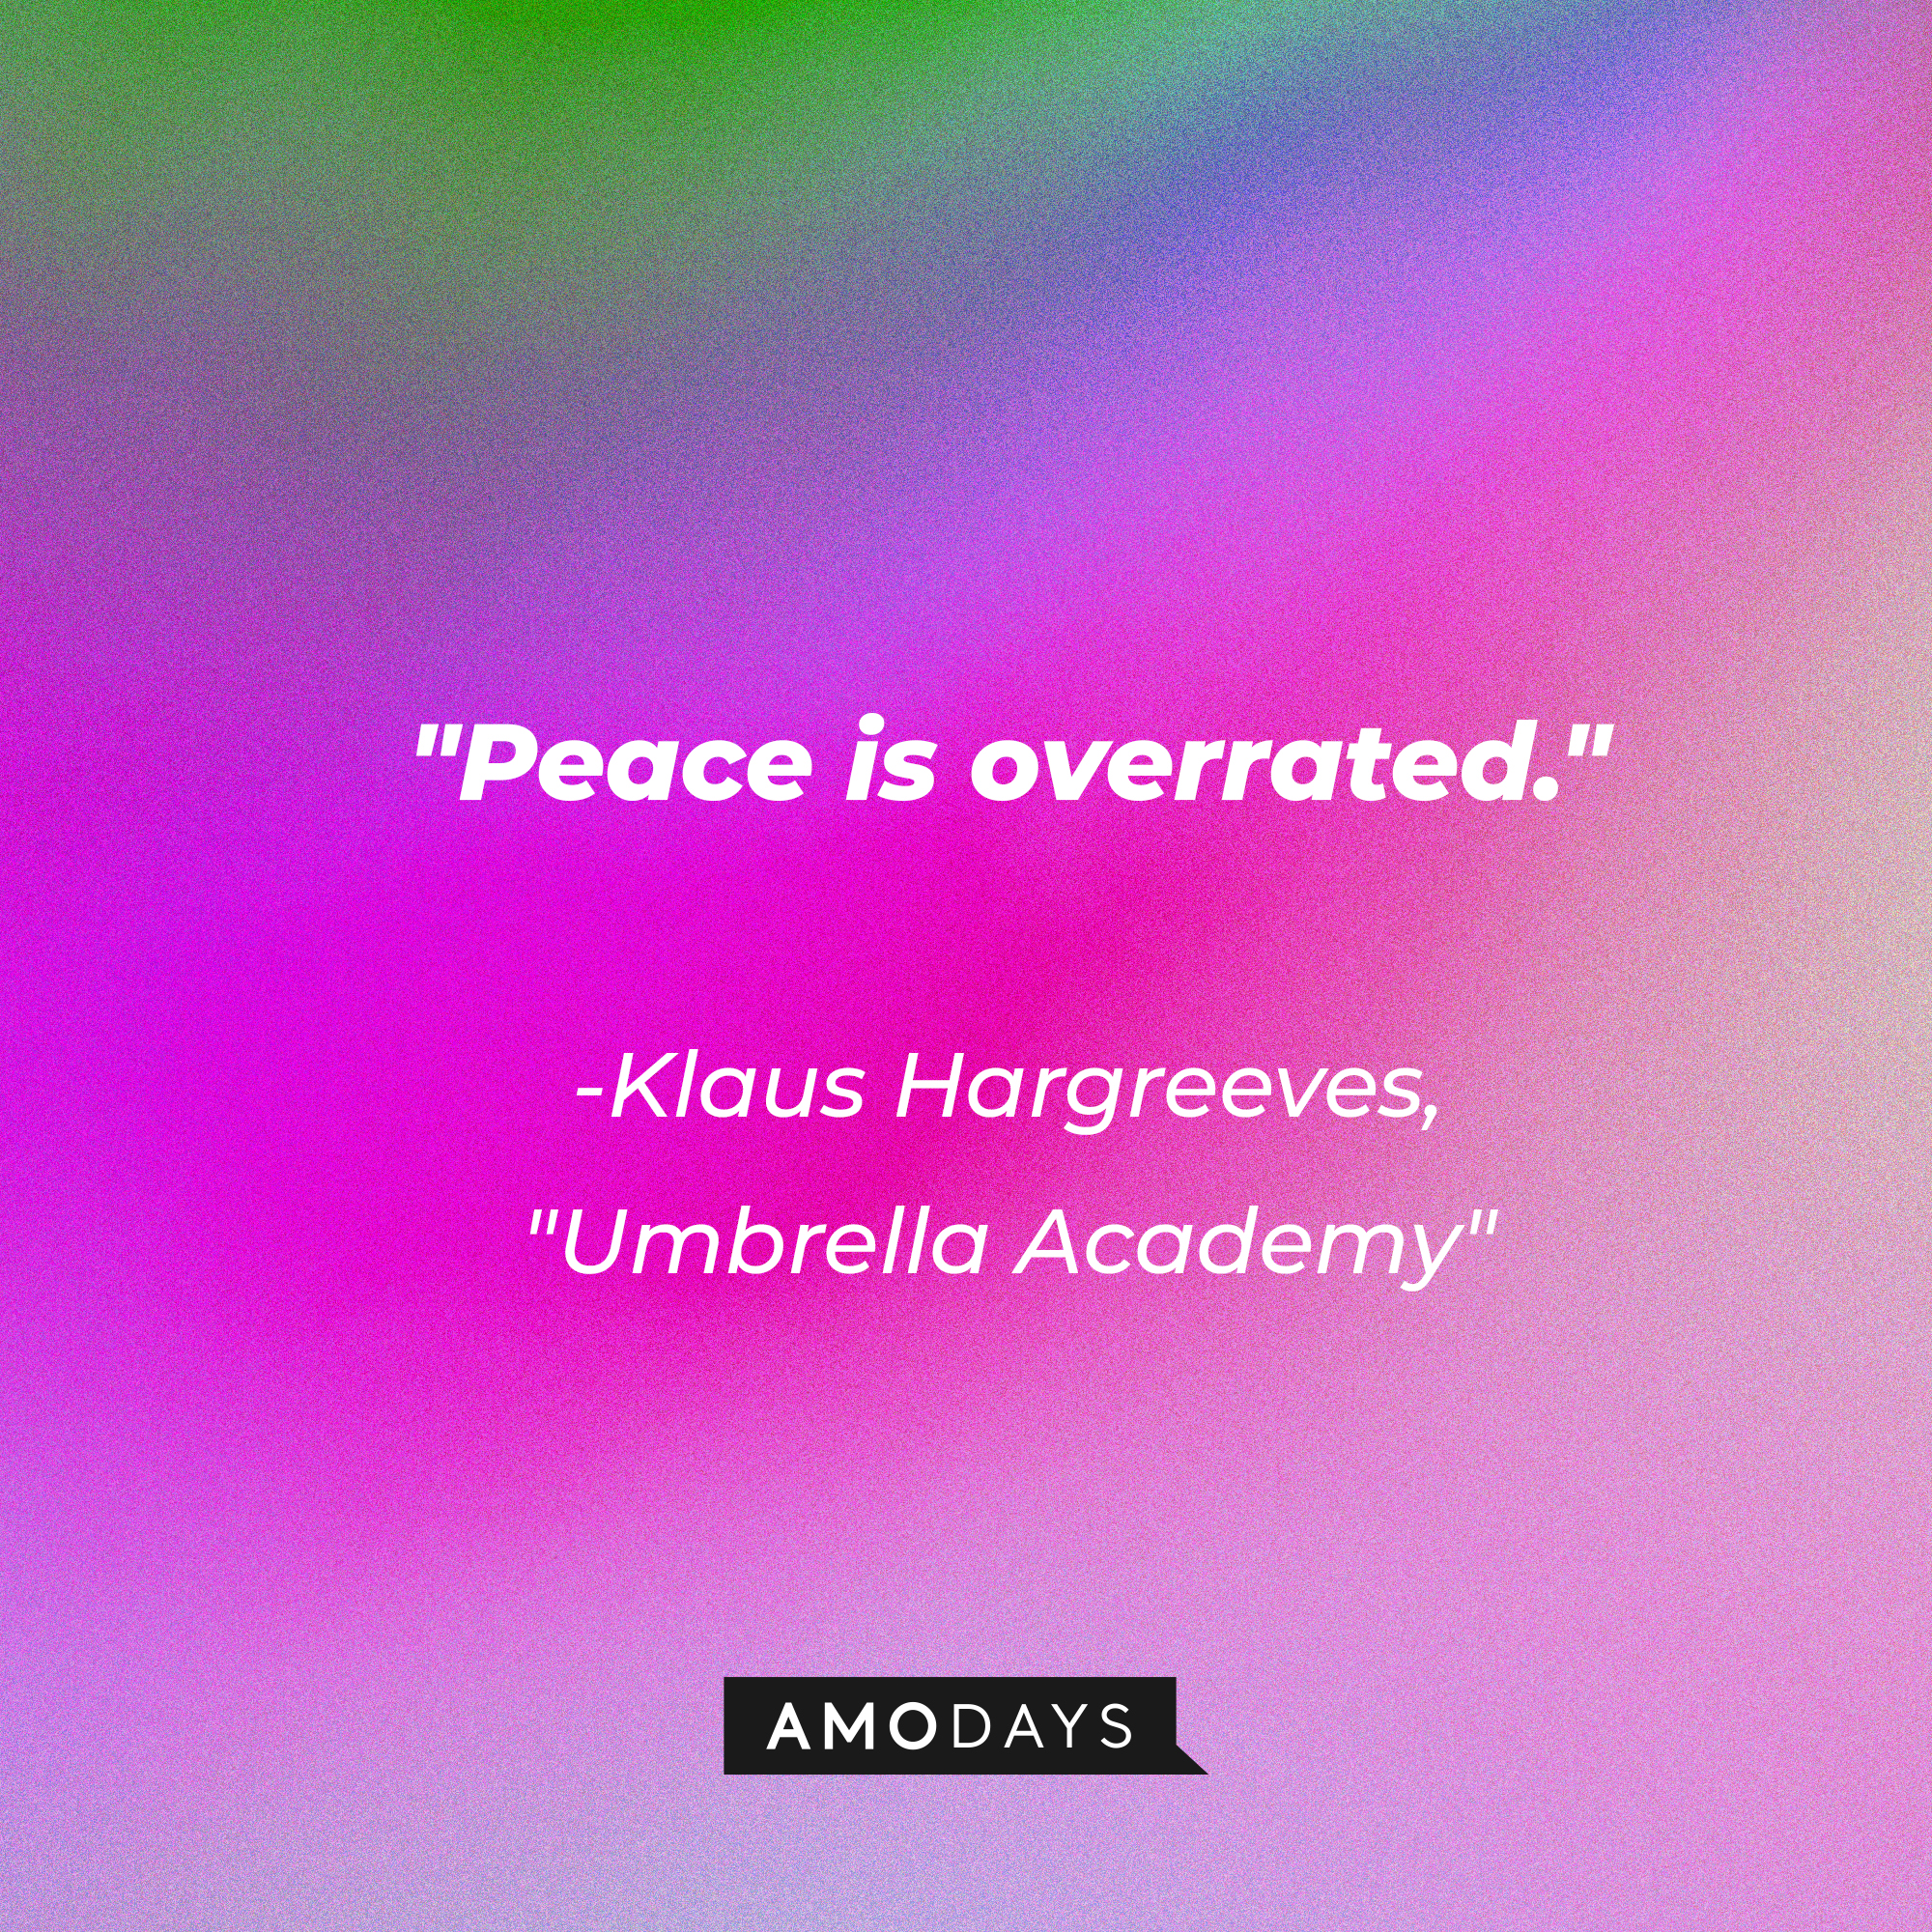 Klaus Hargreeves' quote in "The Umbrella Academy:" "Peace is overrated." | Source: AmoDays